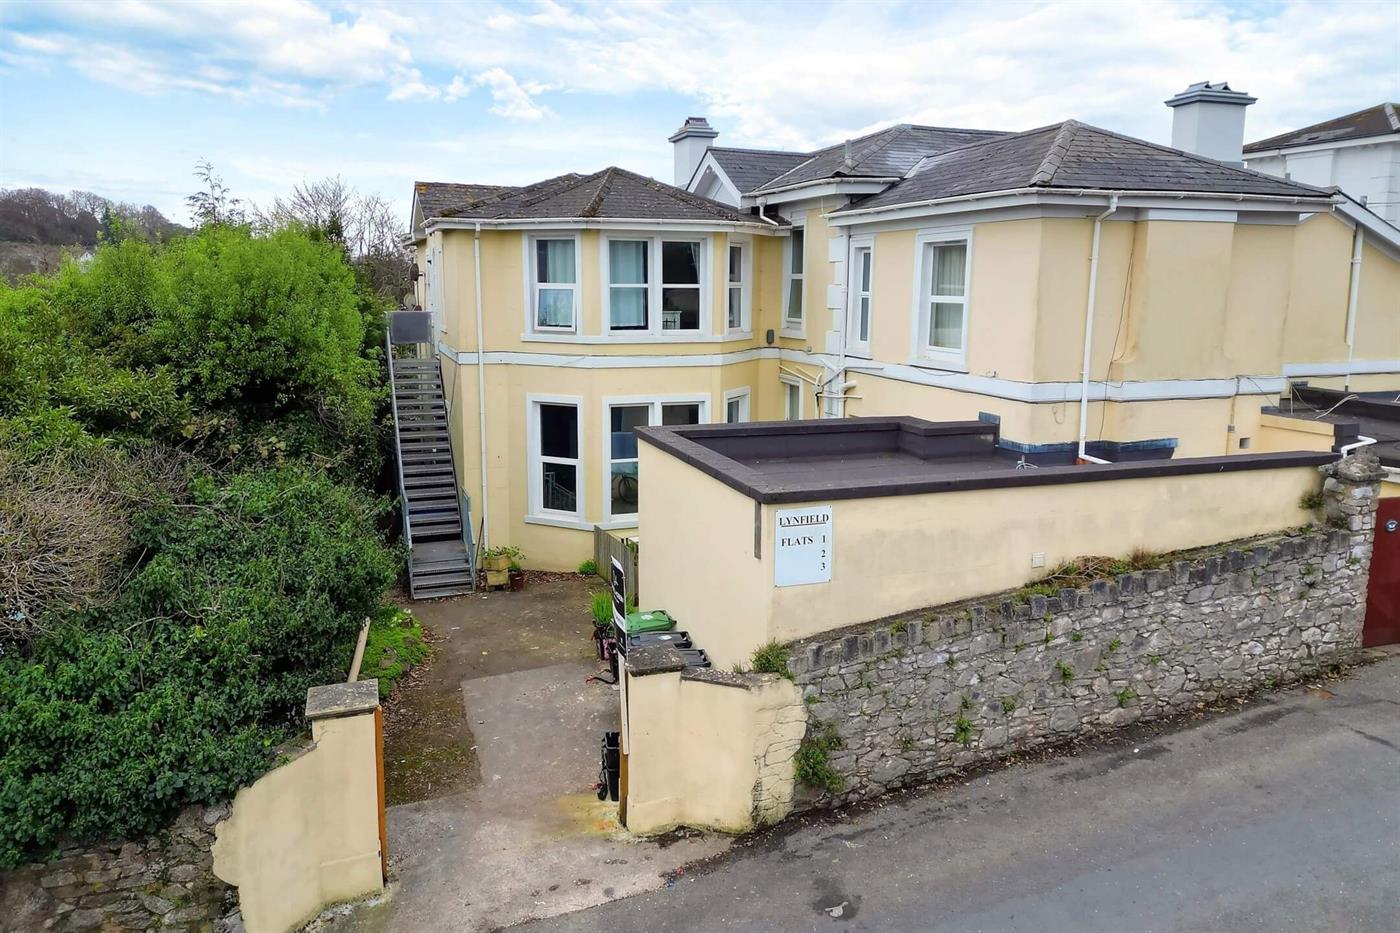 2 Bedroom Apartment to Rent (Let): Lynfield, Middle Warberry Road, Torquay, TQ1 1RN